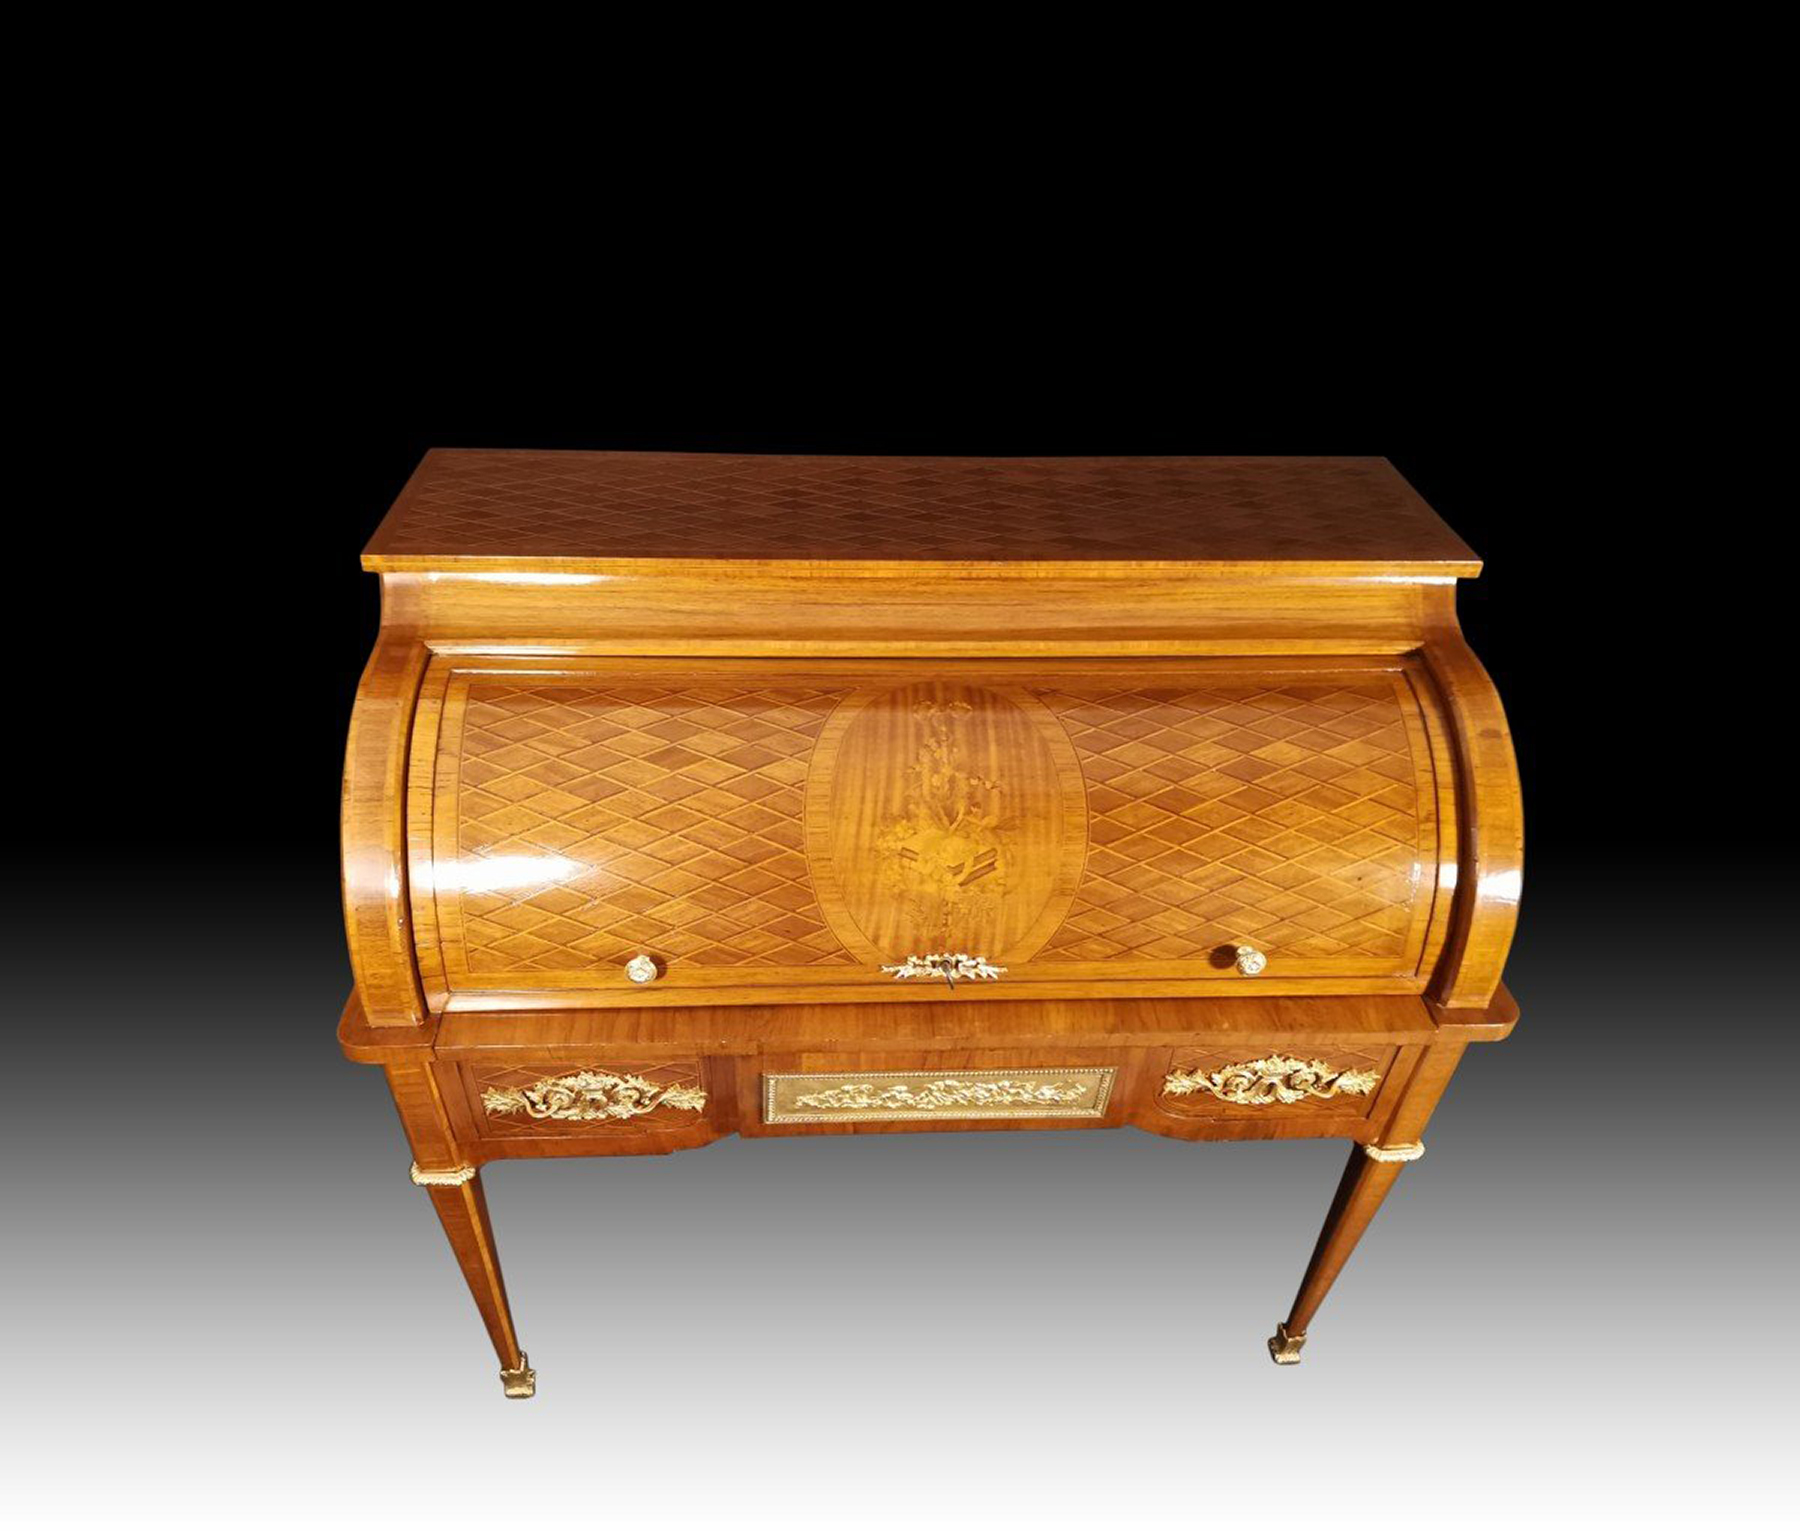 19th century cylindrical desk in Louis XVI style marquetry, 19th century - Image 3 of 7